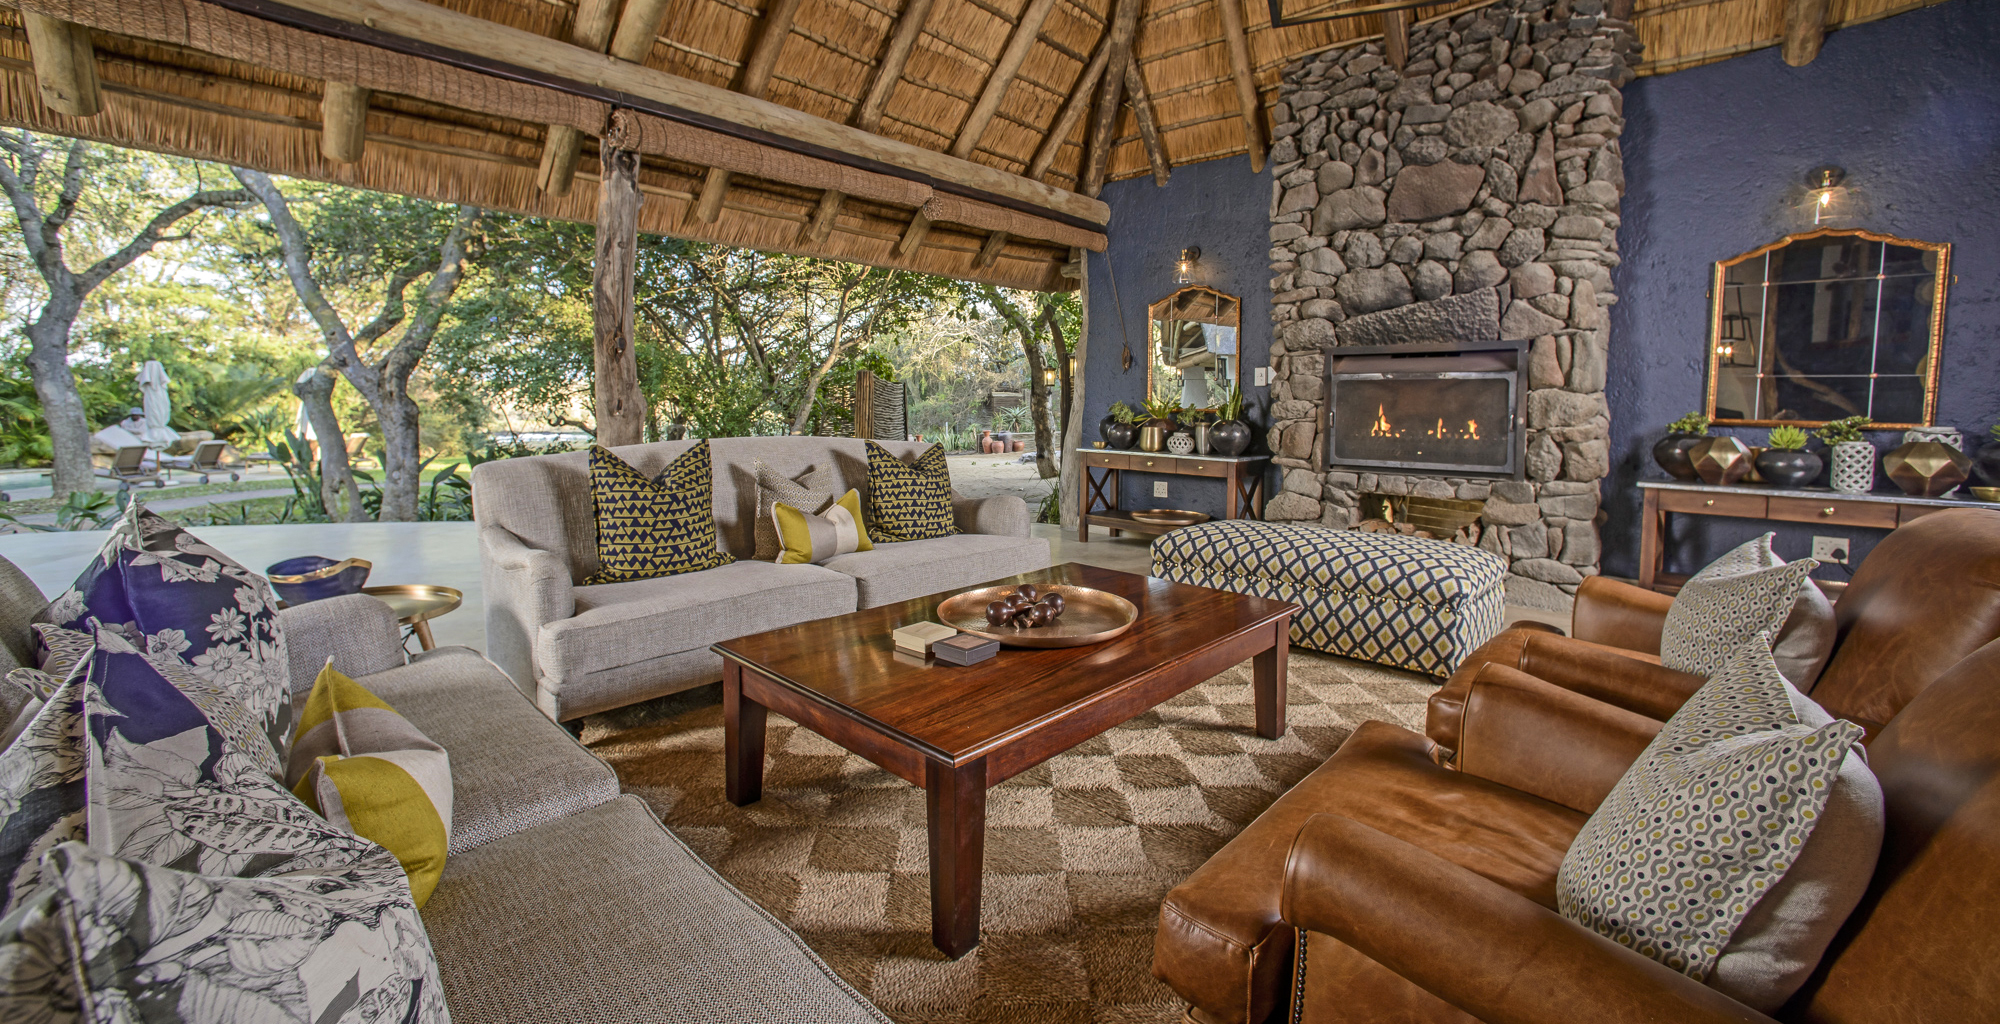 Savanna Private Game Reserve in Kruger National Park, South Africa